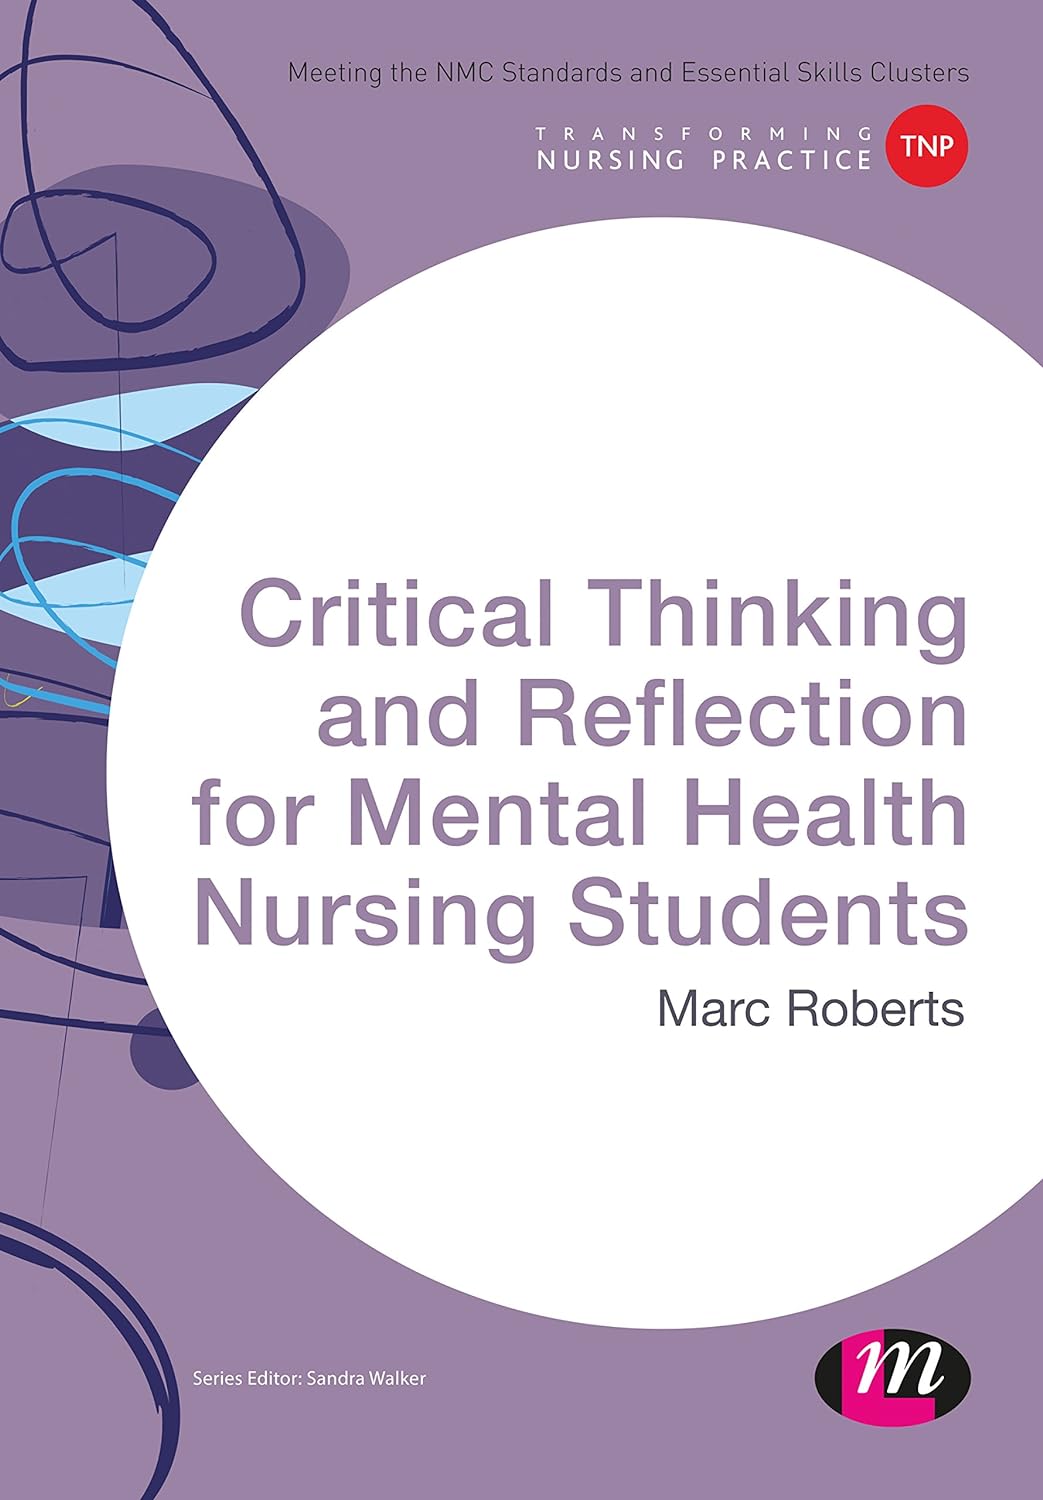 Critical Thinking and Reflection for Mental Health Nursing Students (Transforming Nursing Practice Series) by Marc Roberts 